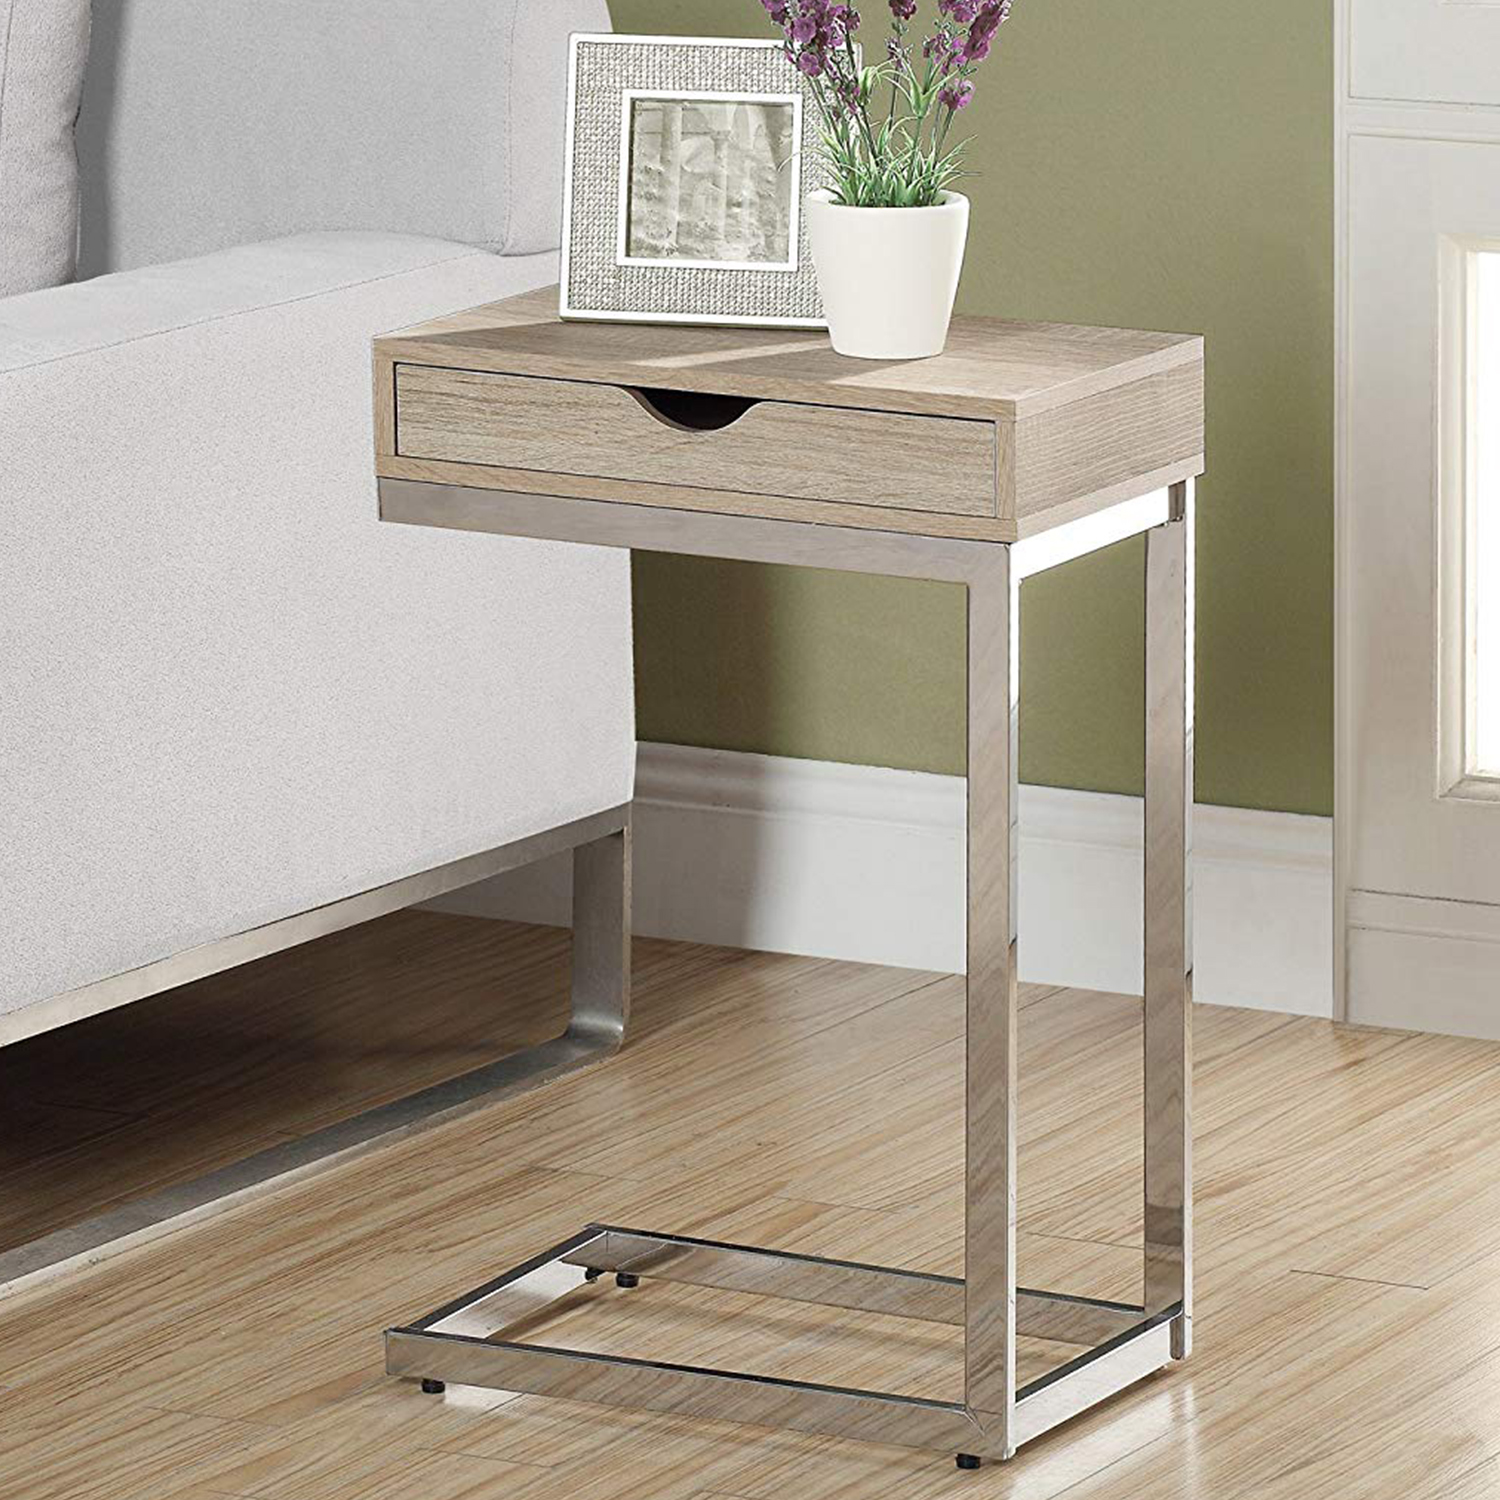 10.25" x 15.75" x 24.5" Natural Finish Metal Drawer Accent Table